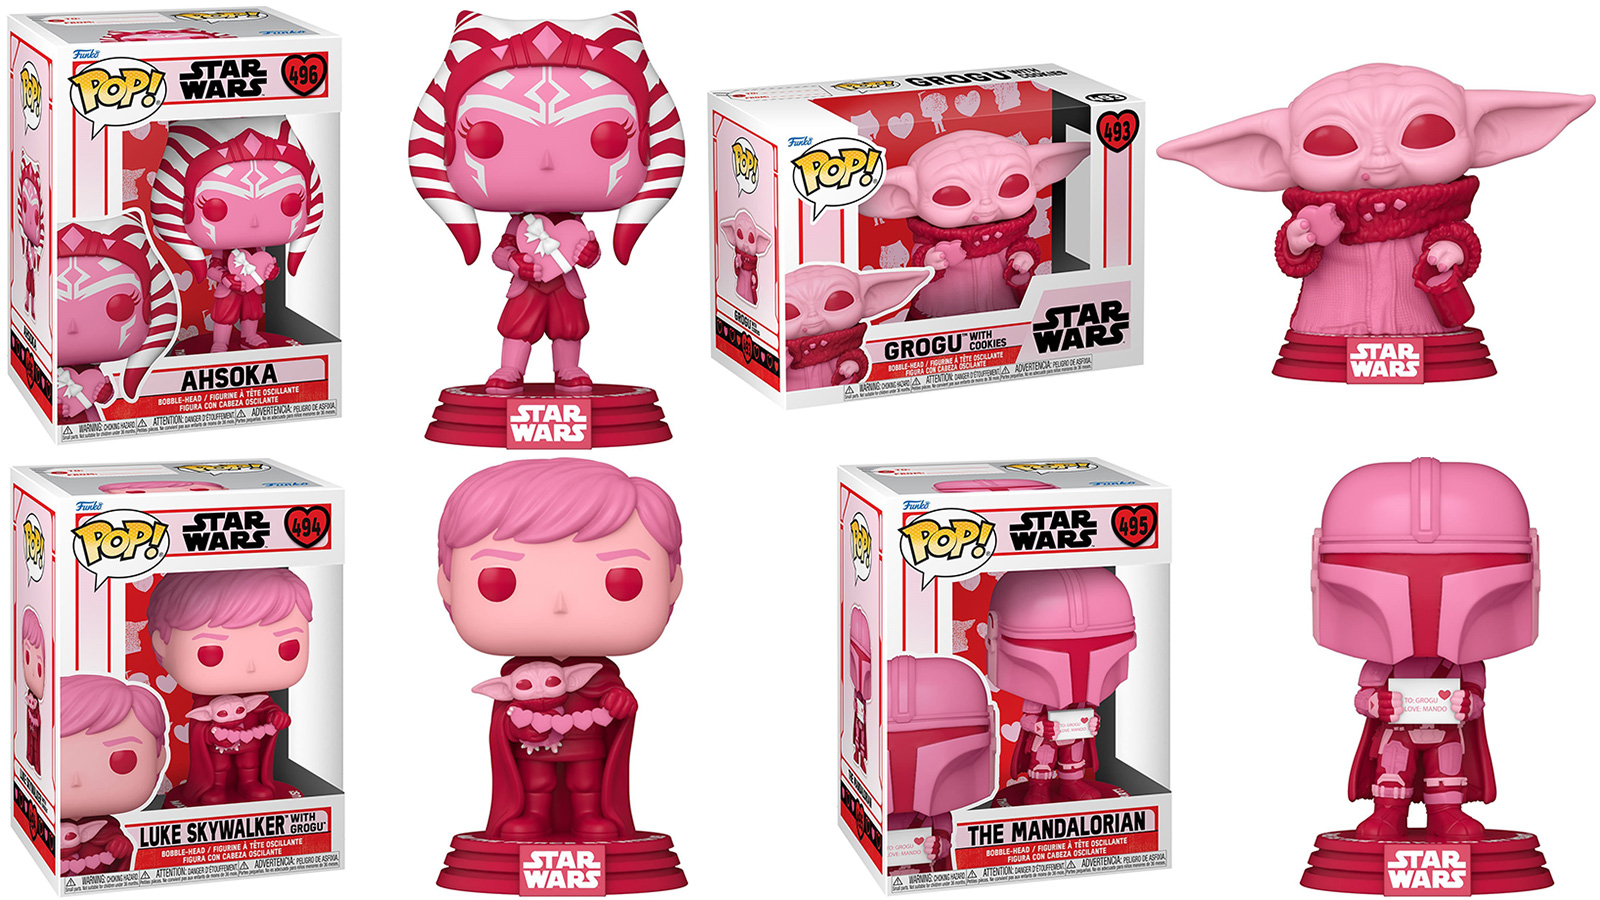 New Funko Valentines Day Star Wars Pop! Vinyl Figures Revealed - Preorders Available At Entertainment Earth